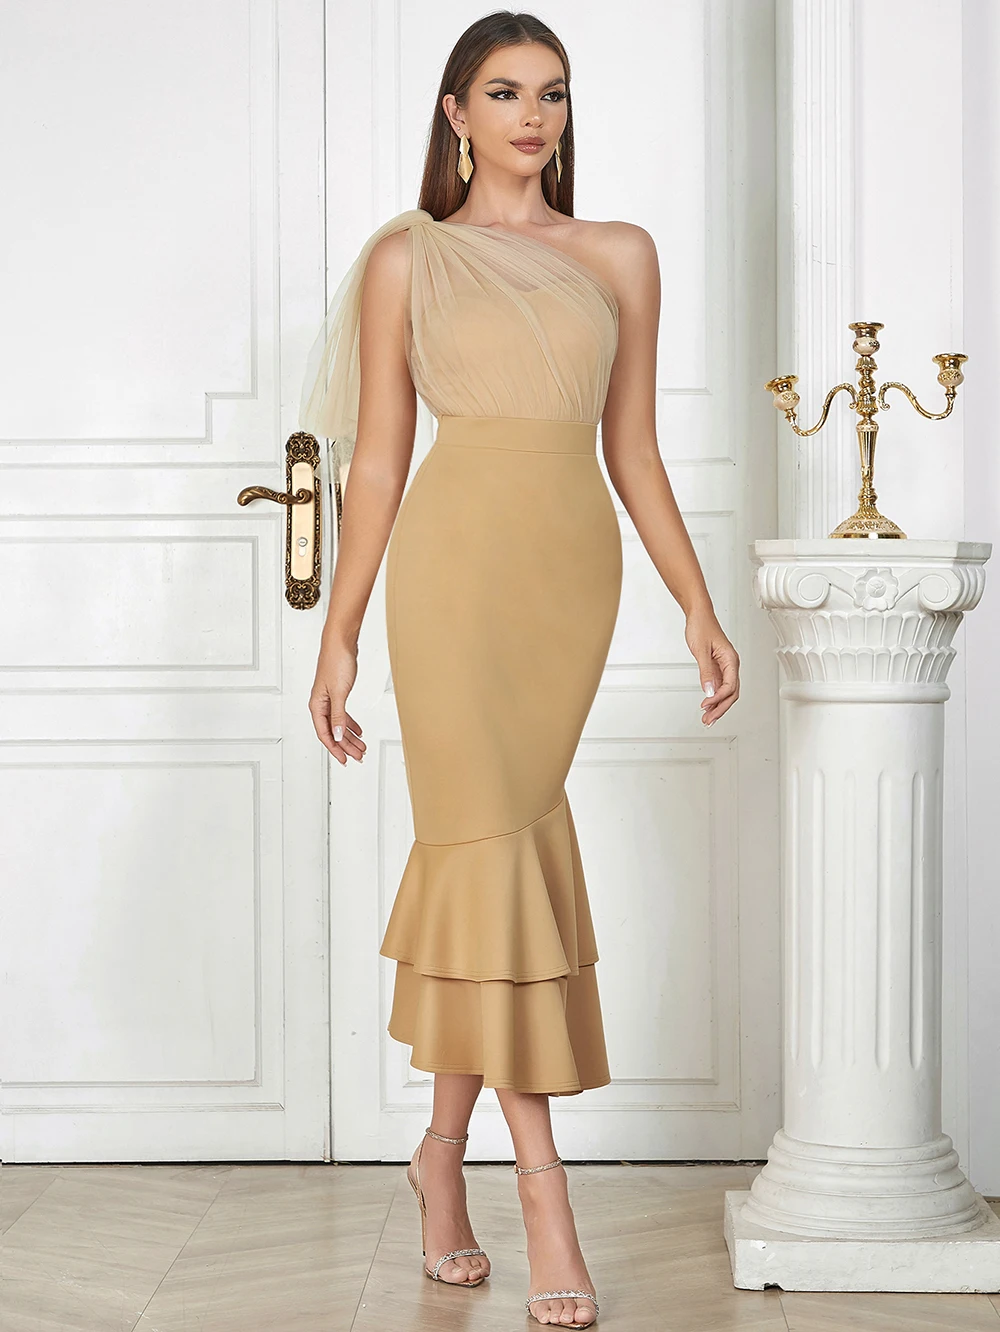 

Lace One-Shoulder Dress in Mustard Yellow - Elegant and Stylish Women's Midi Dress for Special Occasions